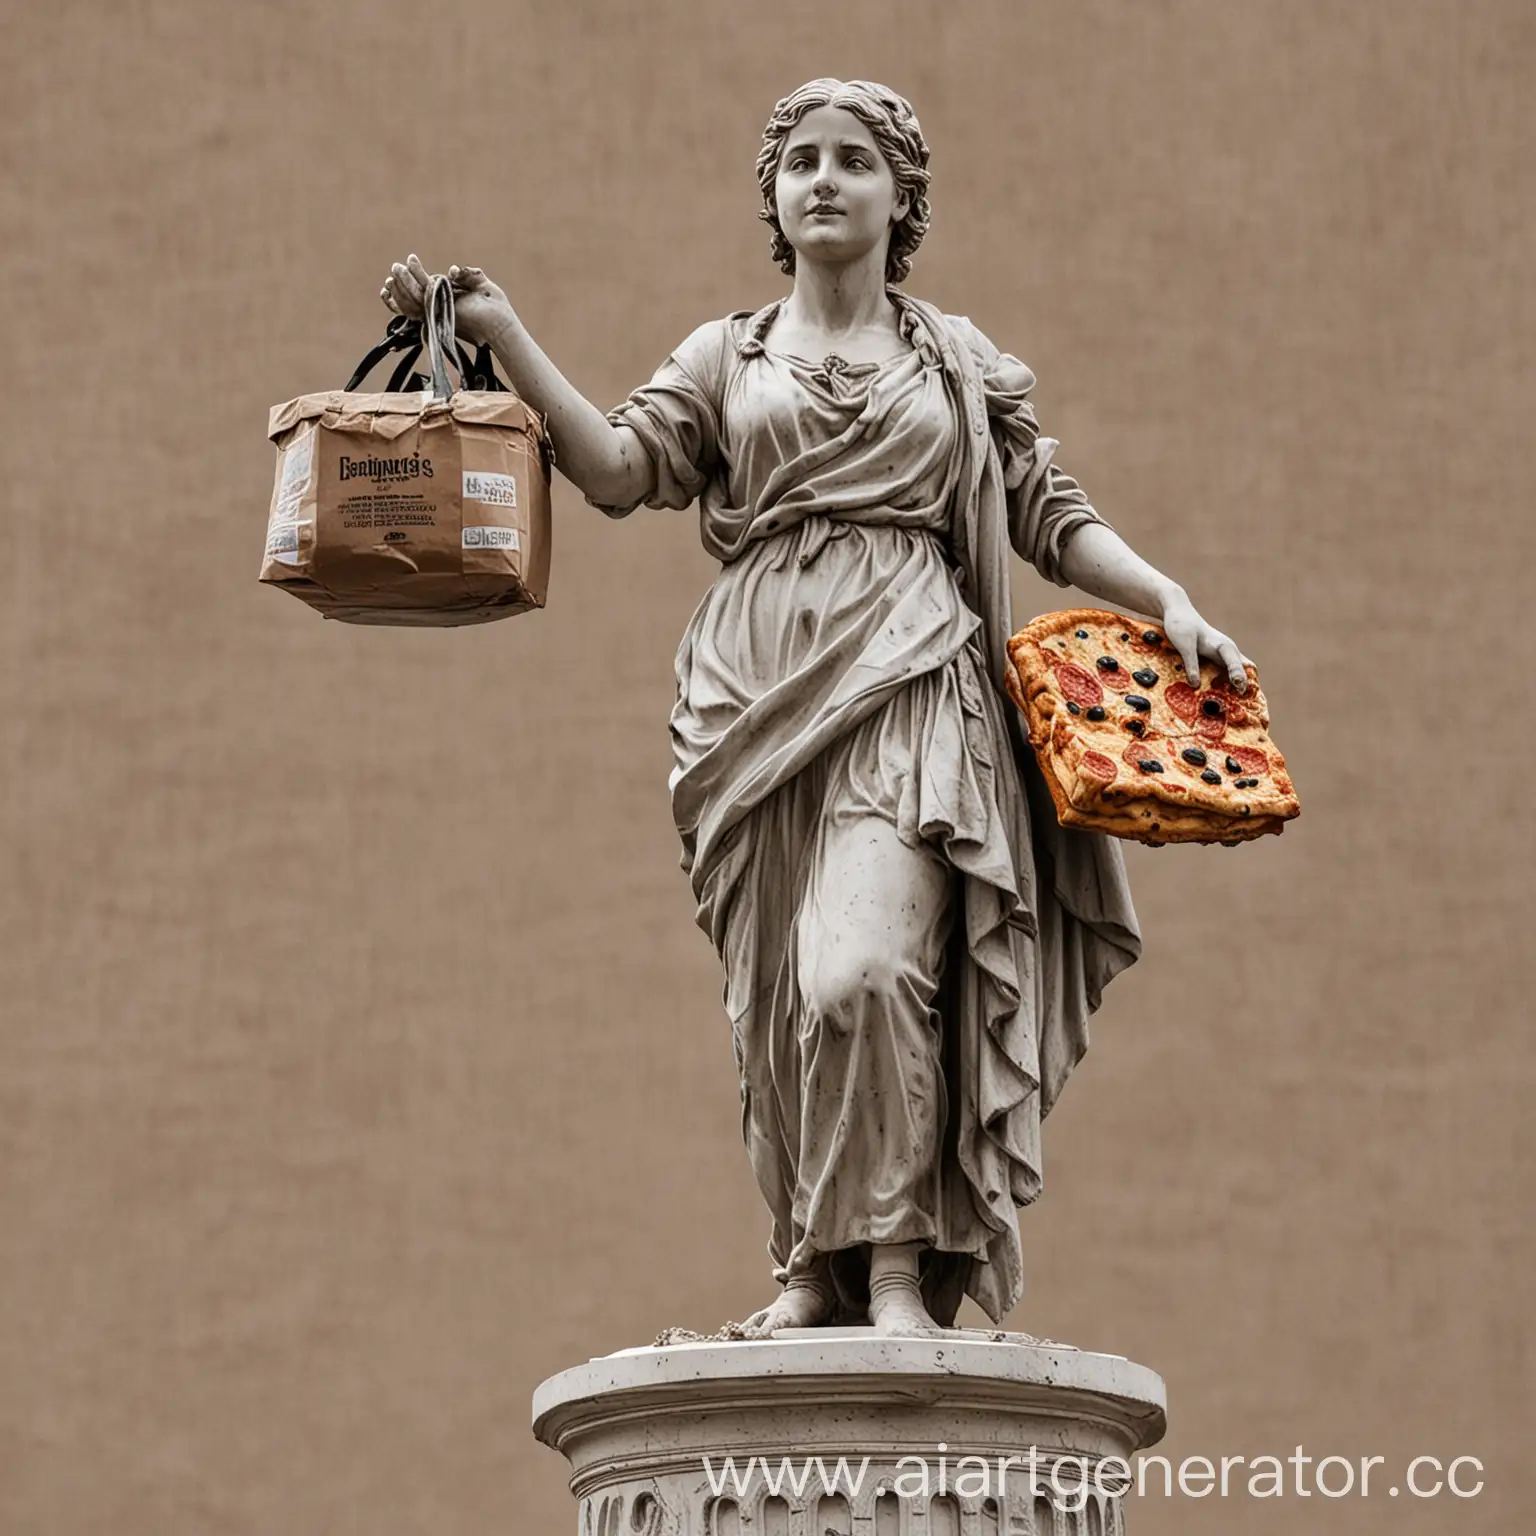 Statue-of-Woman-with-Pizza-Box-and-Bag-on-High-Pedestal